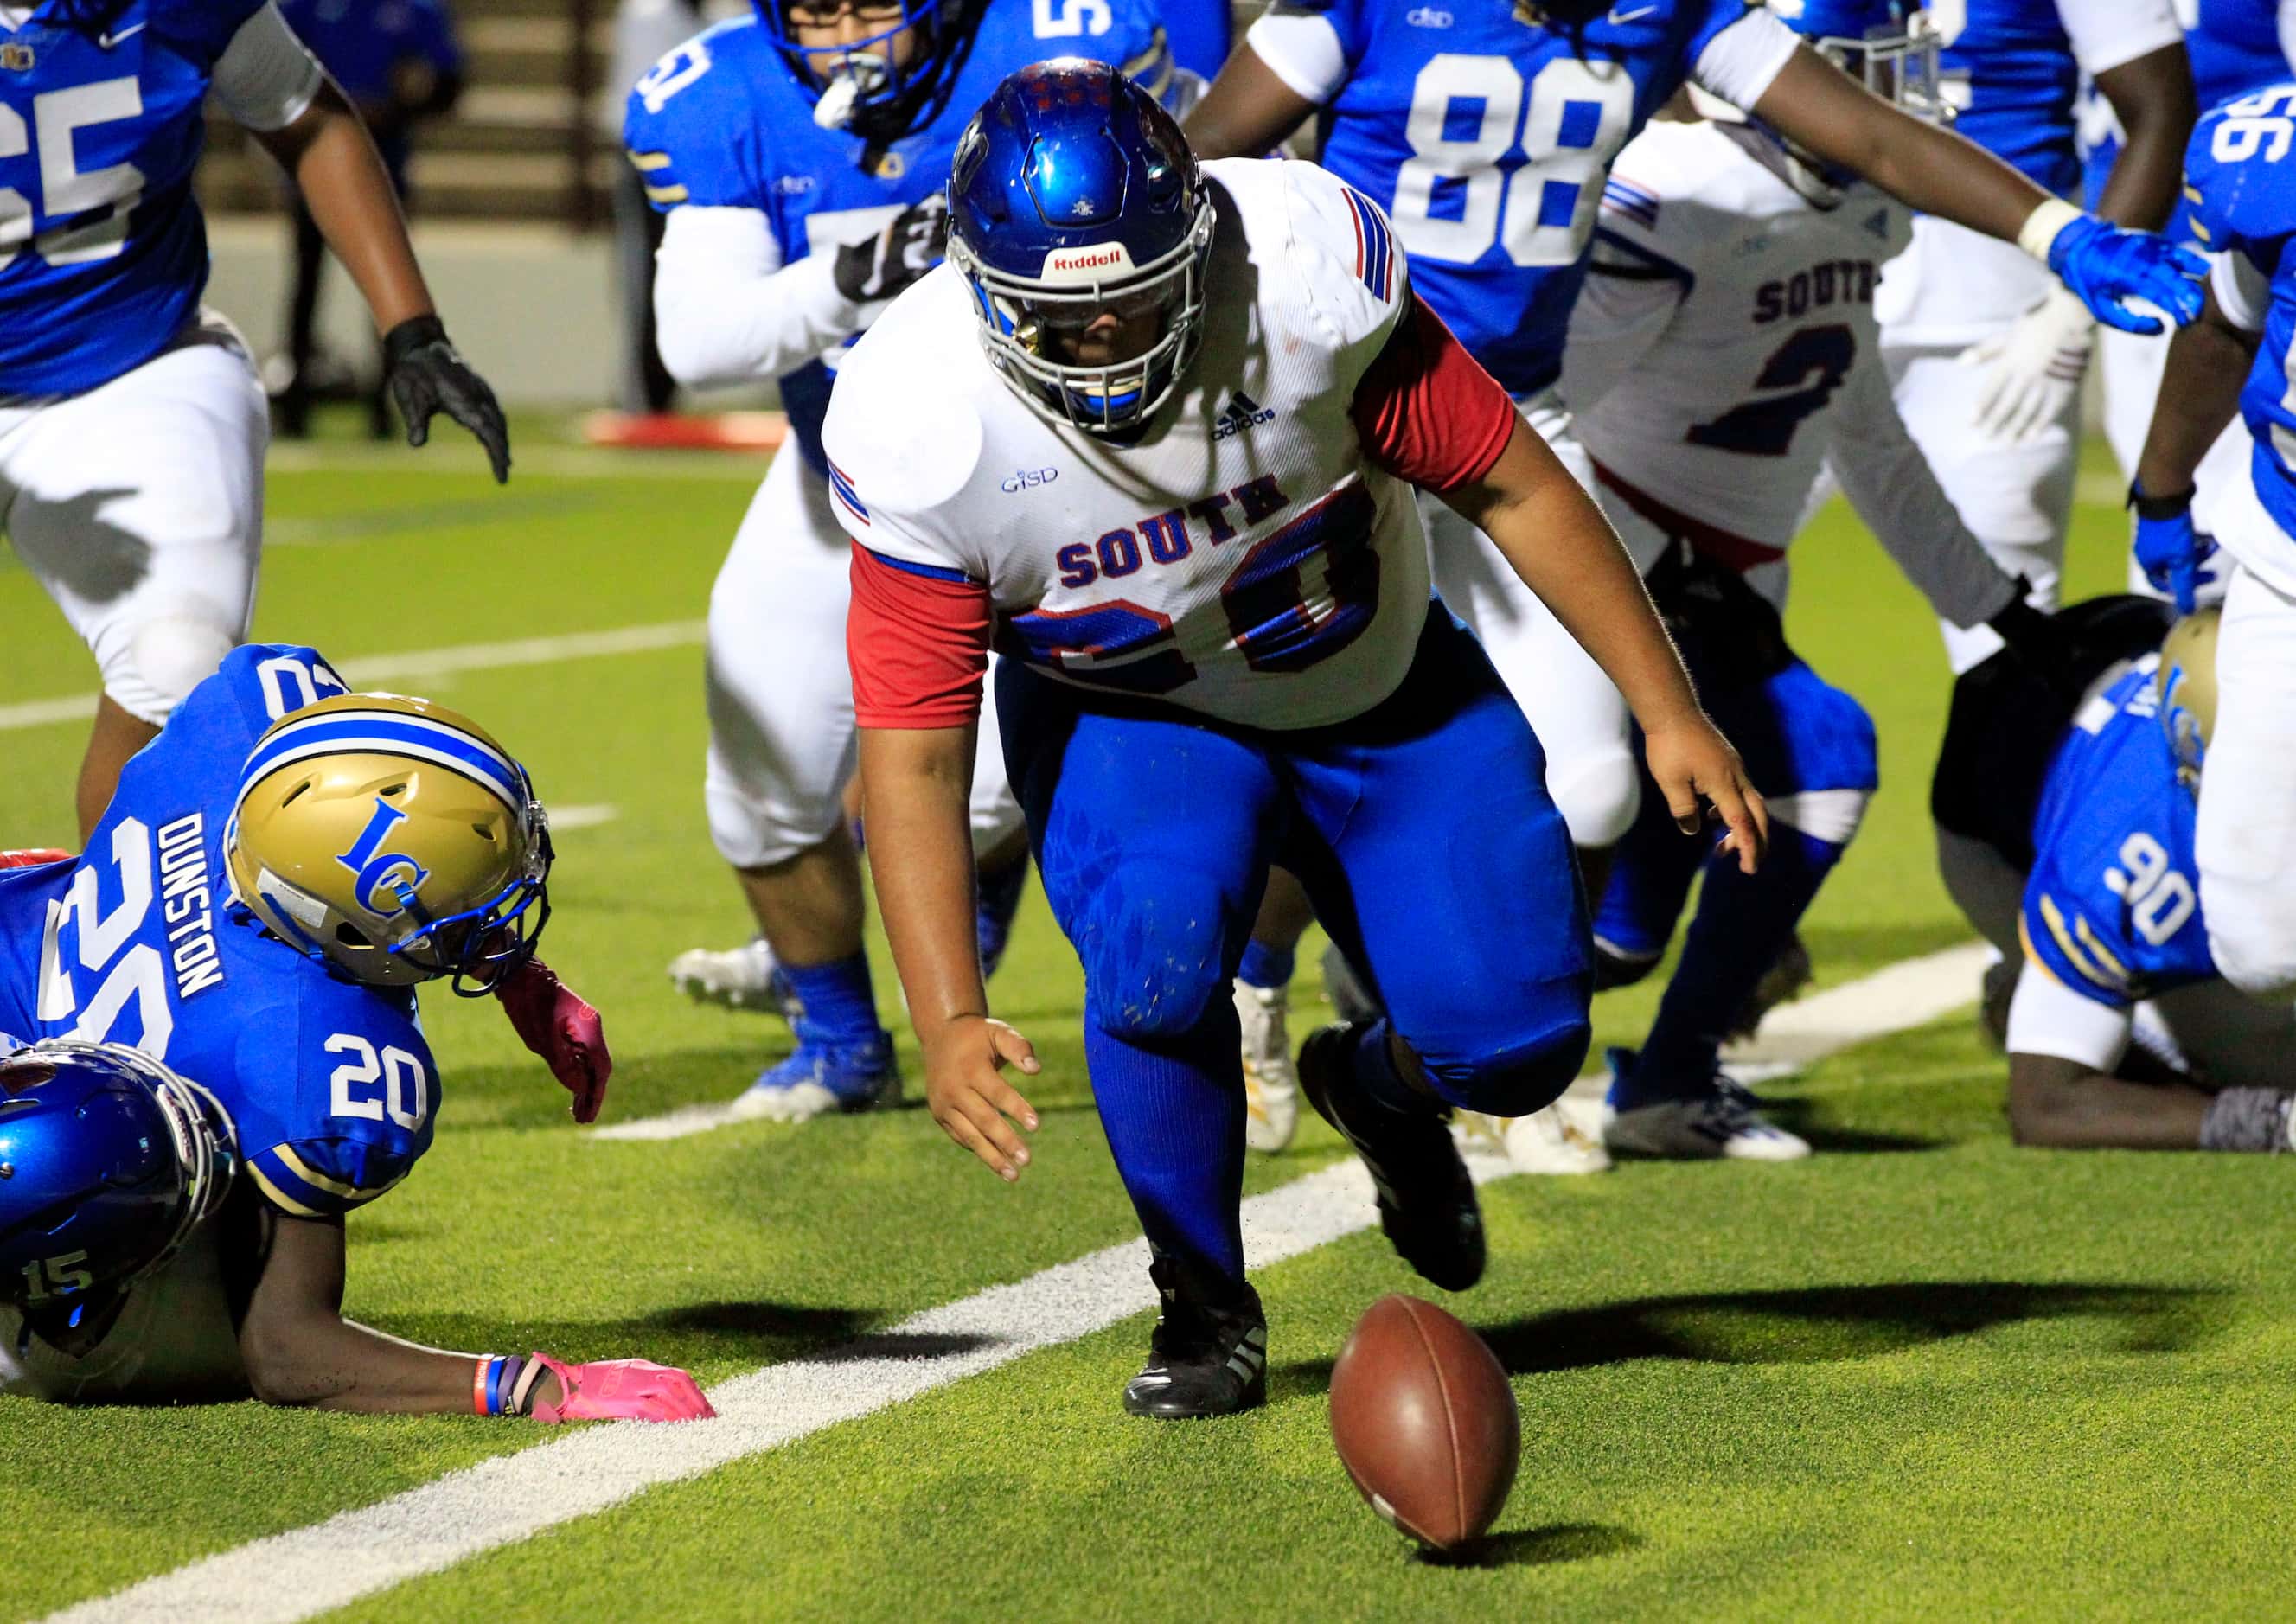 South Garland’s Ismael Alvarez (60) chases down a fumble in the end zone to stop a Lakeview...